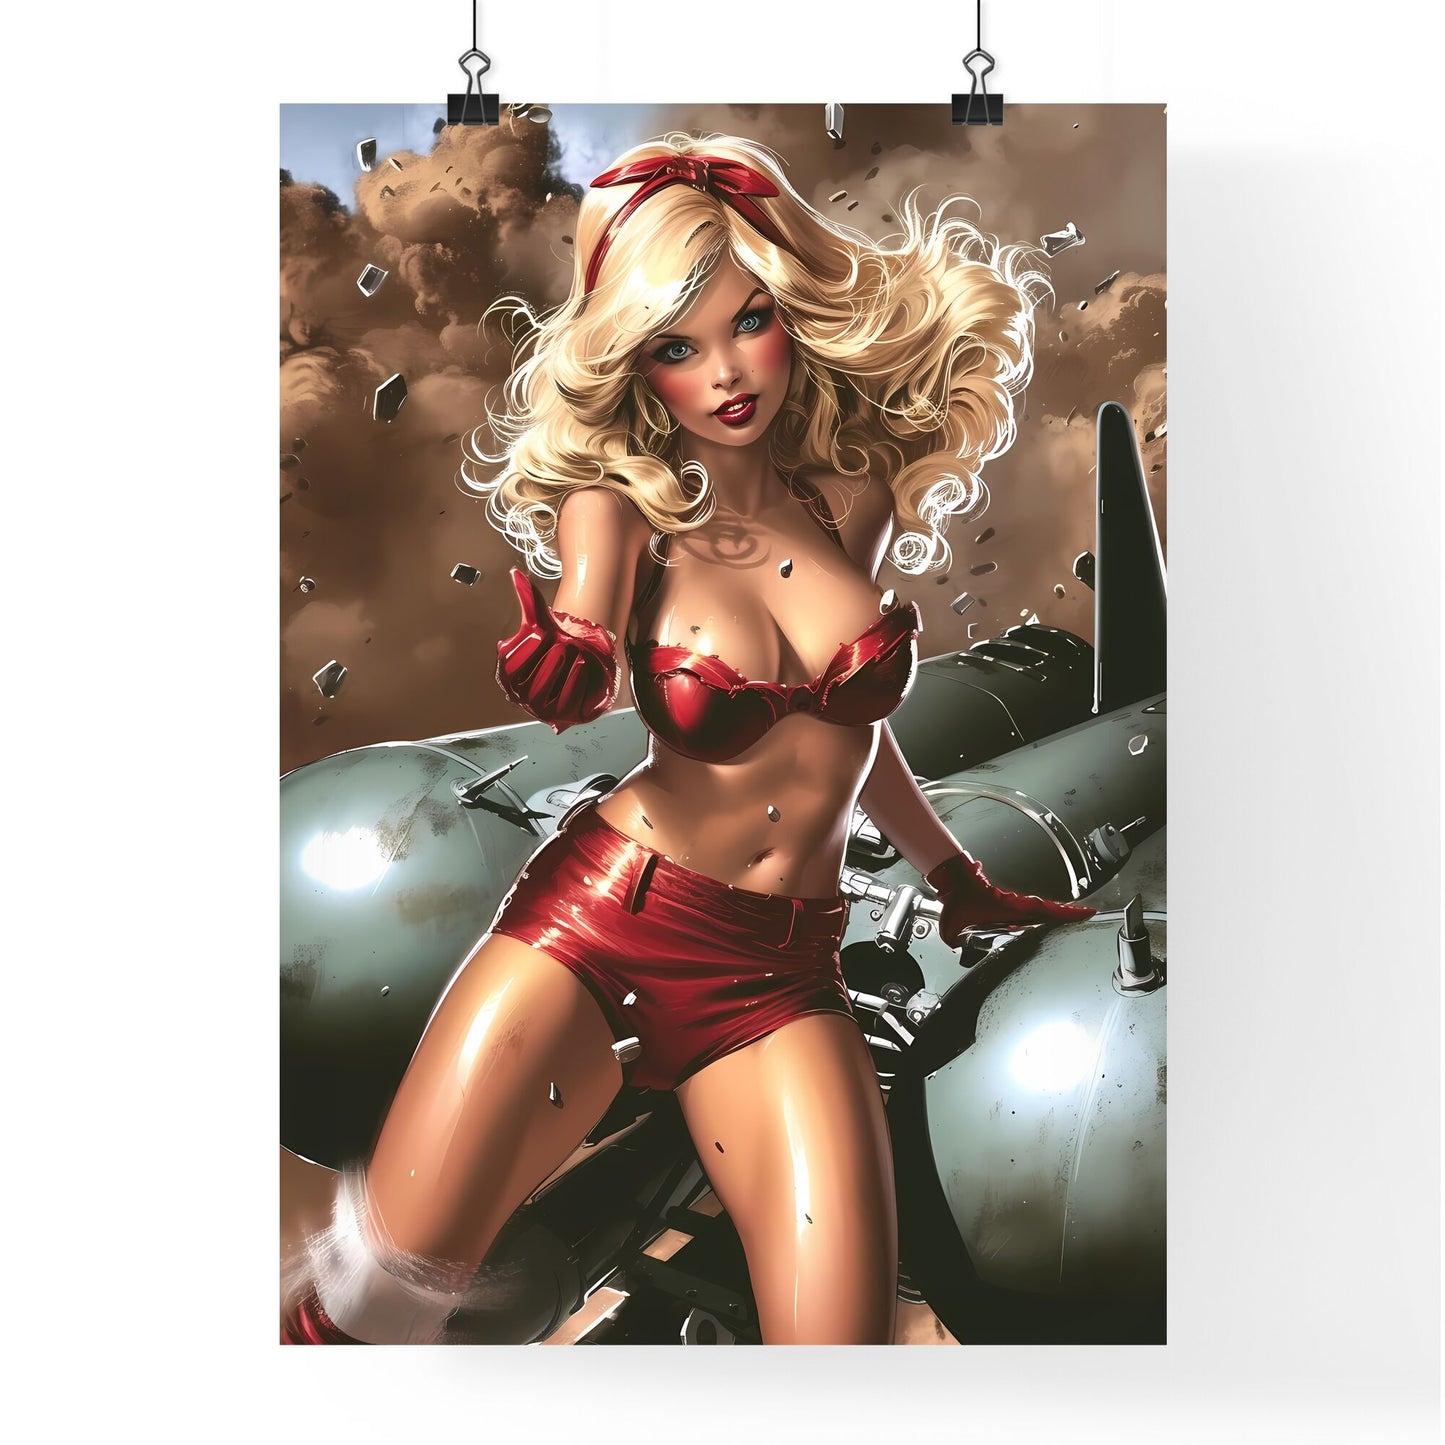 American kitsch style art work of a girl riding a nuke - Art print of a woman in red lingerie and red gloves standing on a plane Default Title